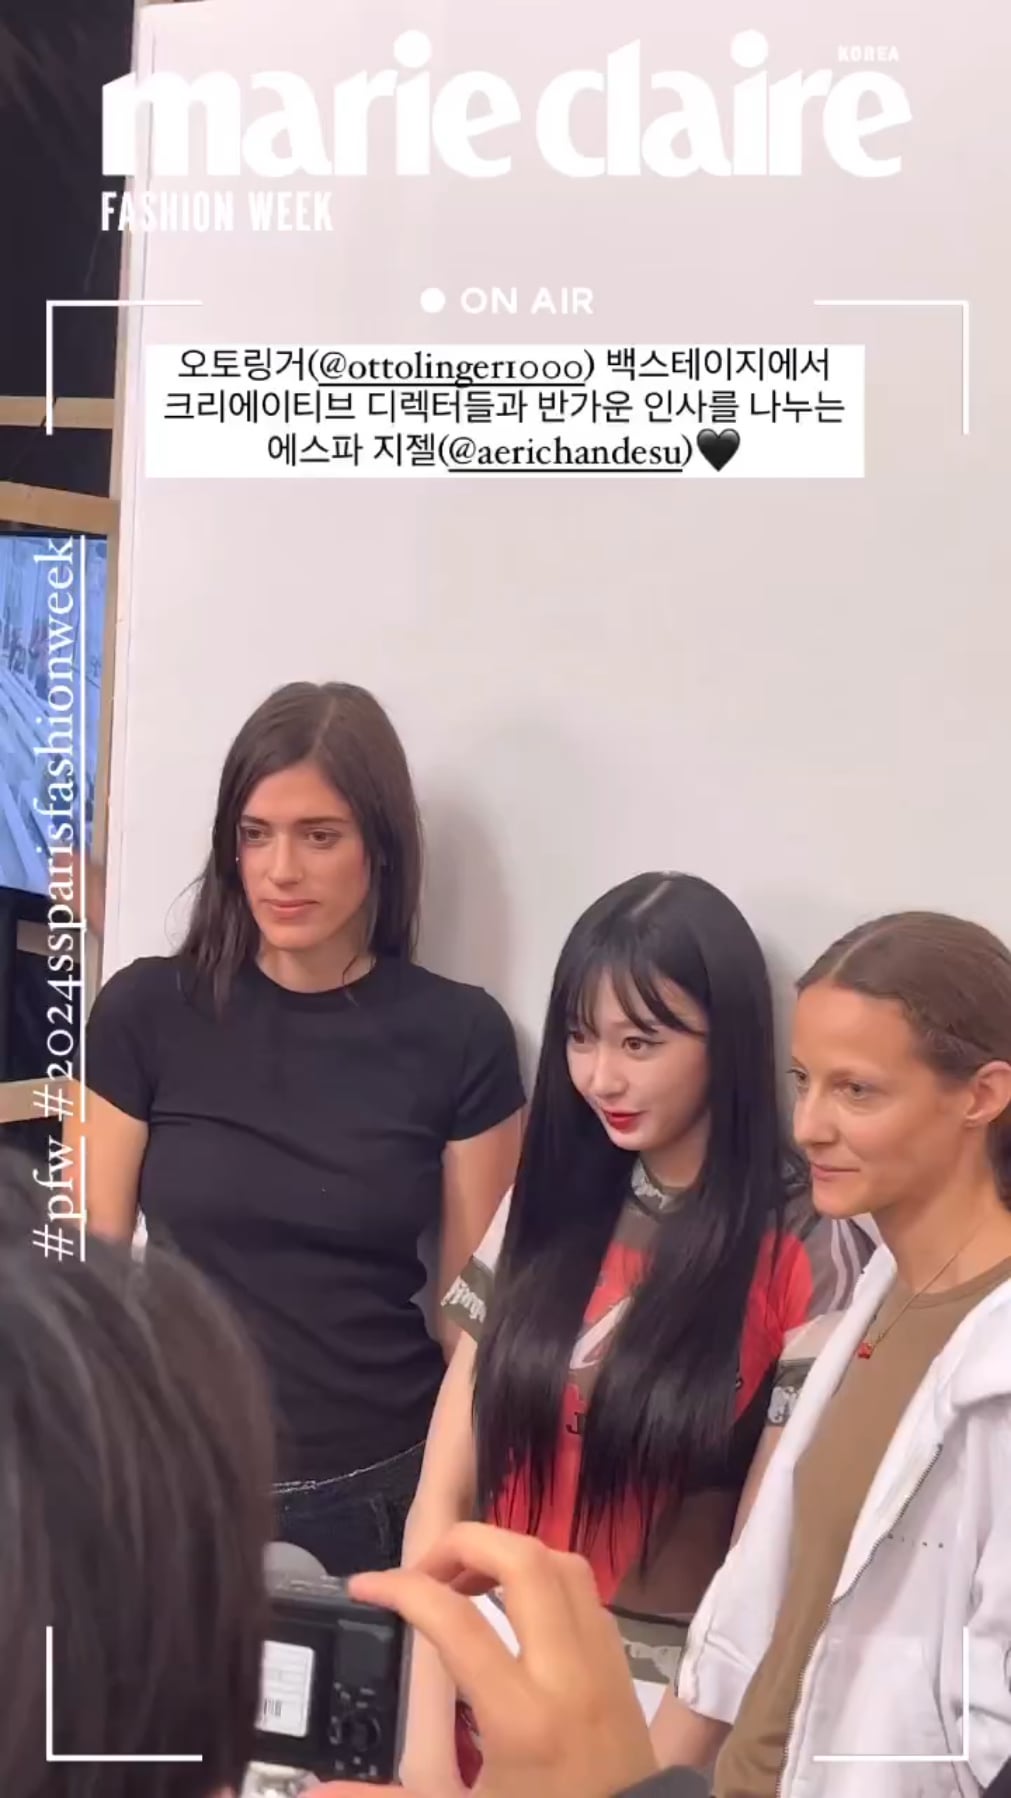 231001 Marie Claire Korea Instagram Story Update with Giselle and creative directors of Ottolinger